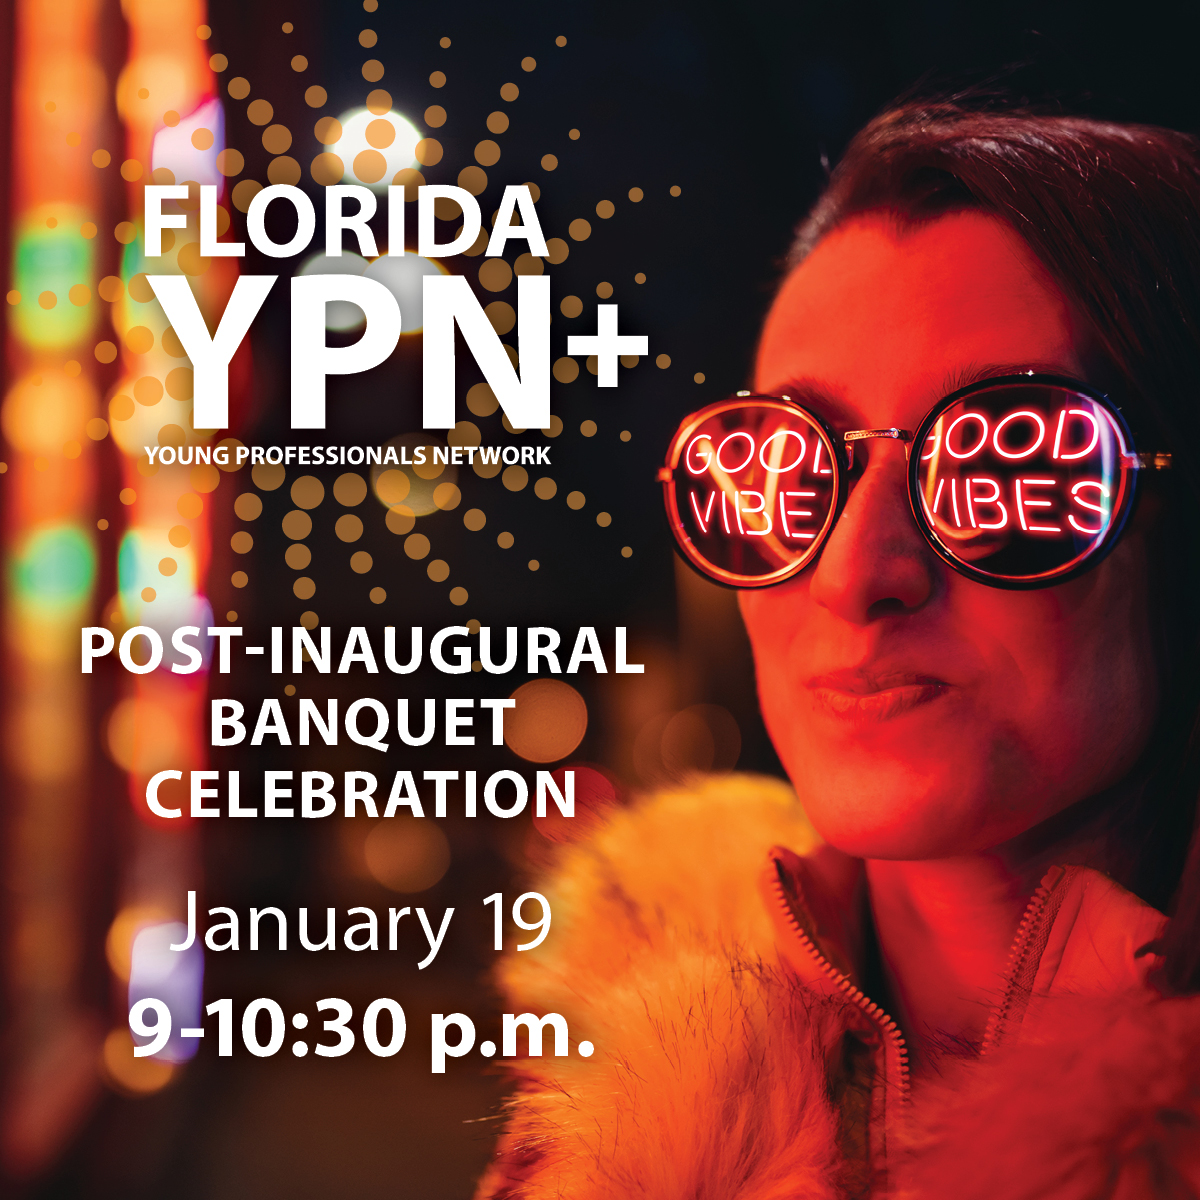 🚨 Calling all Mid-Winter Business Meeting attendees! Florida Realtors YPN wants to see YOU at their YPN+ event on Jan. 19. Raise a glass to the leadership team and enjoy the live band from 9-10:30 p.m. 🎶  #YourBizPartner #FloridaRealtors #FloridaReal…